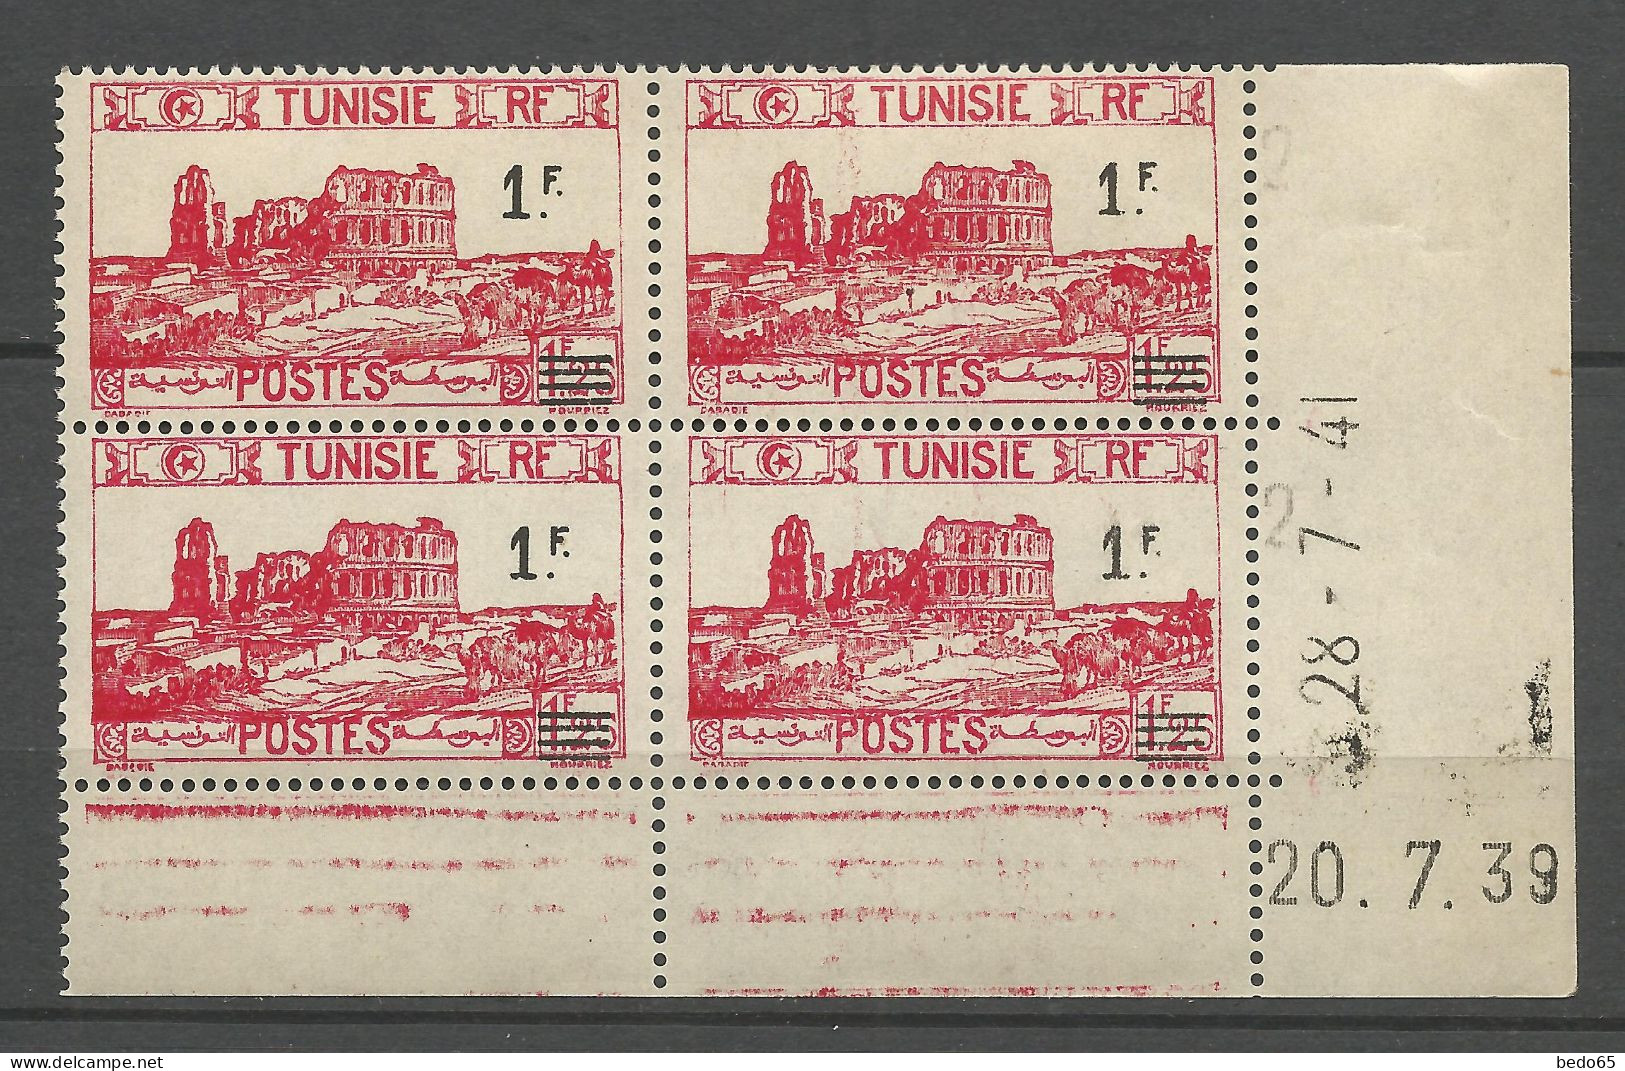 TUNISIE N° 224 Coin Daté 28.7.41 Surcharge Recto Verso NEUF**  SANS CHARNIERE / Hingeless / MNH - Neufs